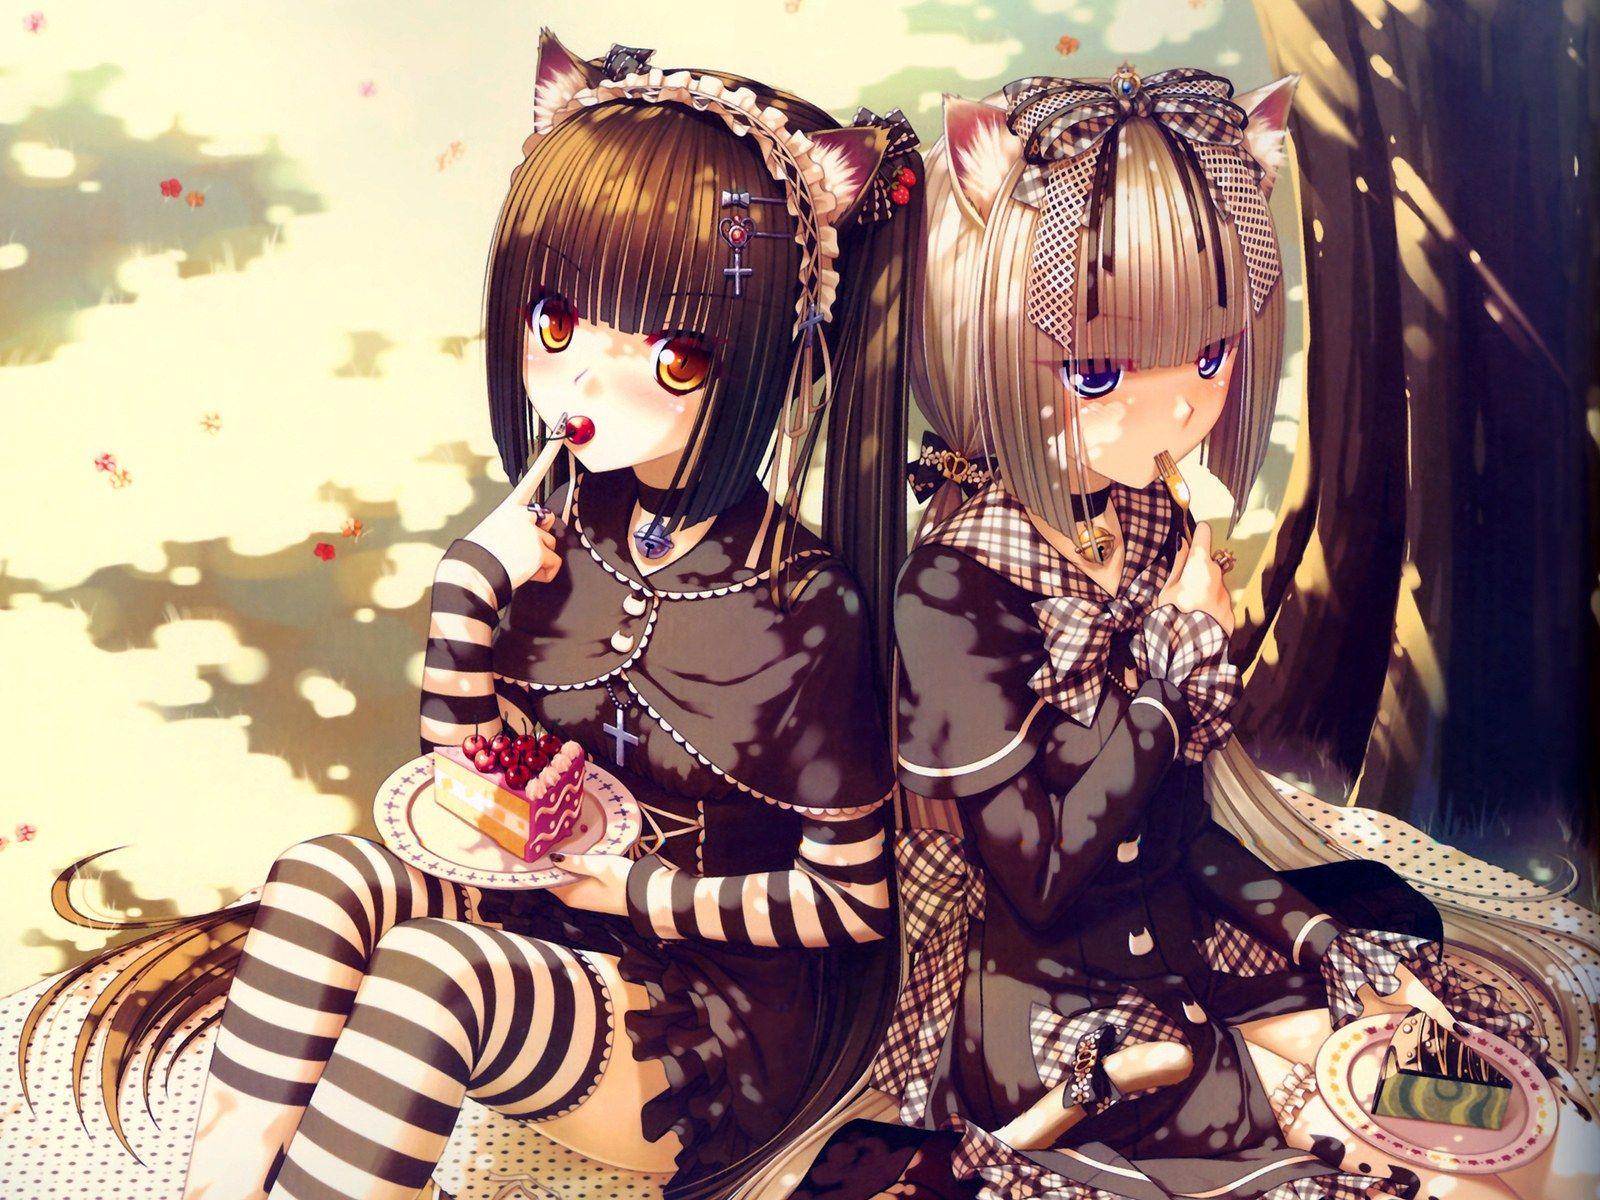 Cute Anime Girl Wallpapers 19763 1600x1200 px ~ HDWallSource